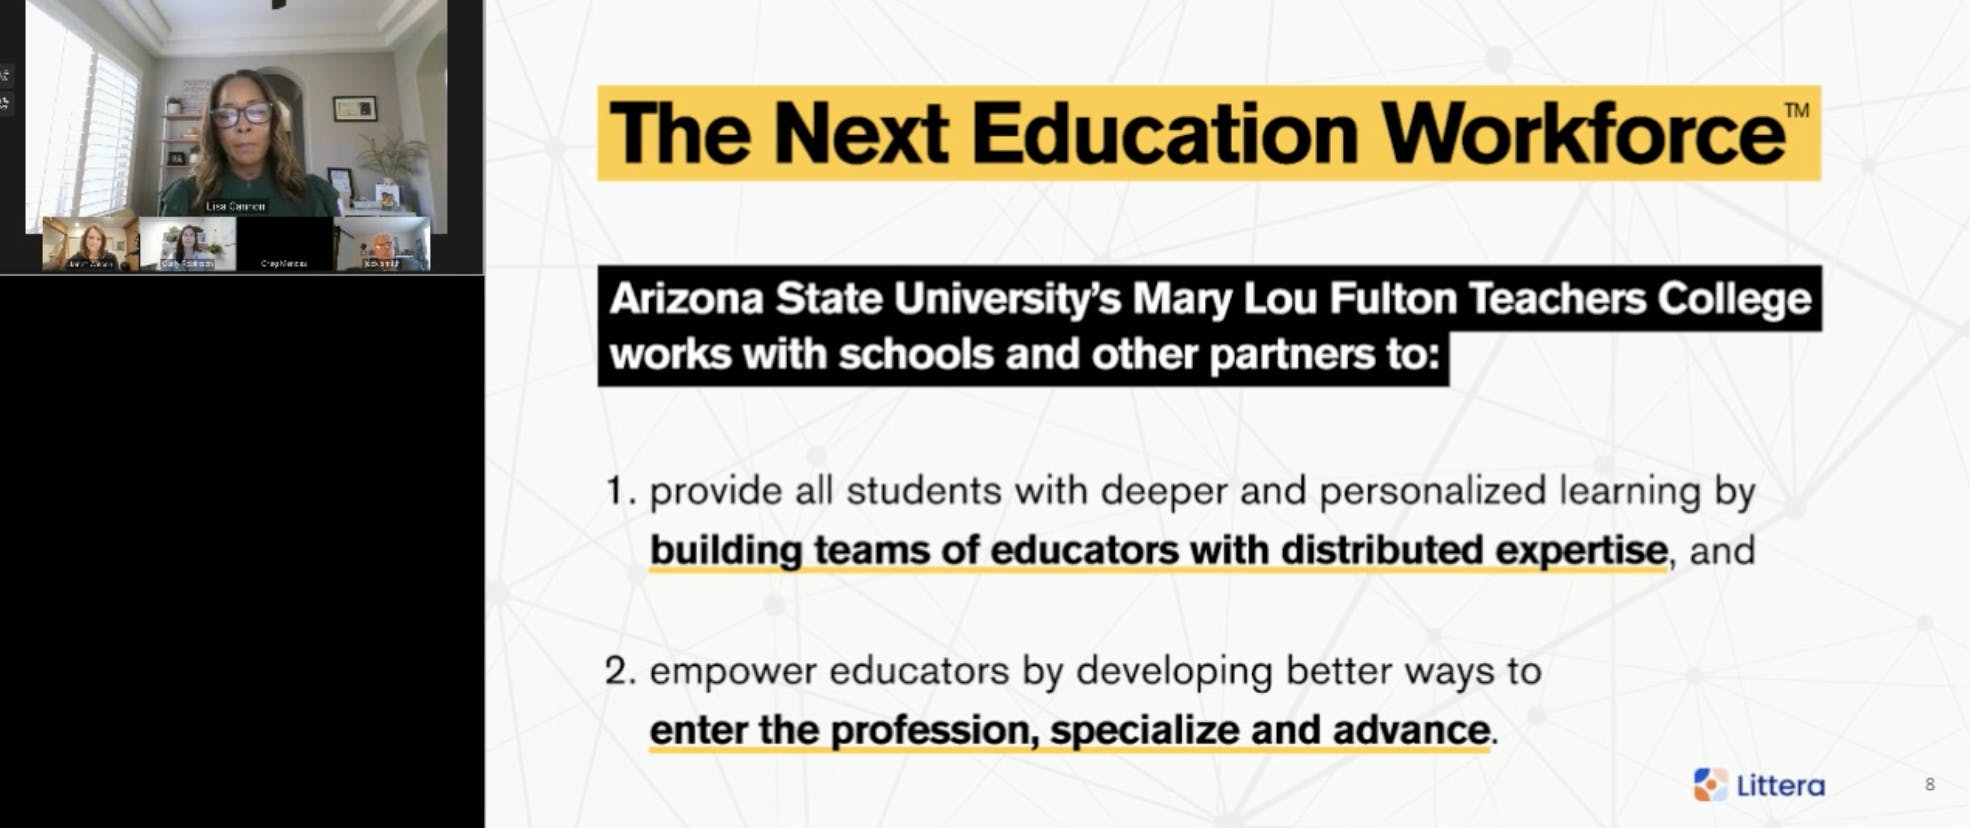 Dr. Lisa McCray Cannon presenting ASU's Next Education Workforce Initiative